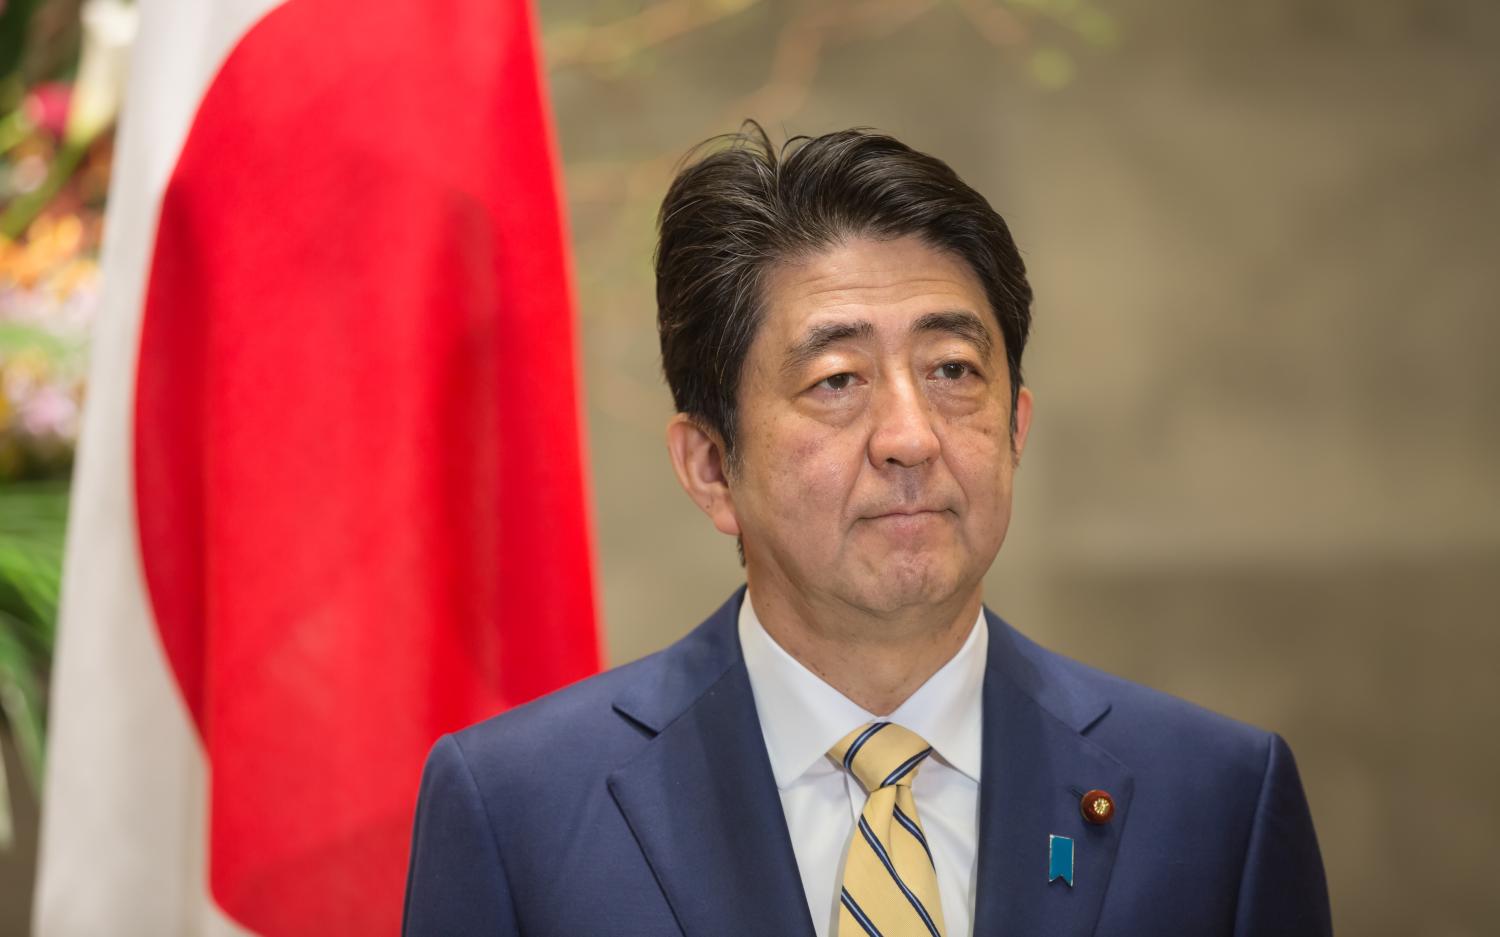 Image: PM Shinzo Abe in front of Japanese flag